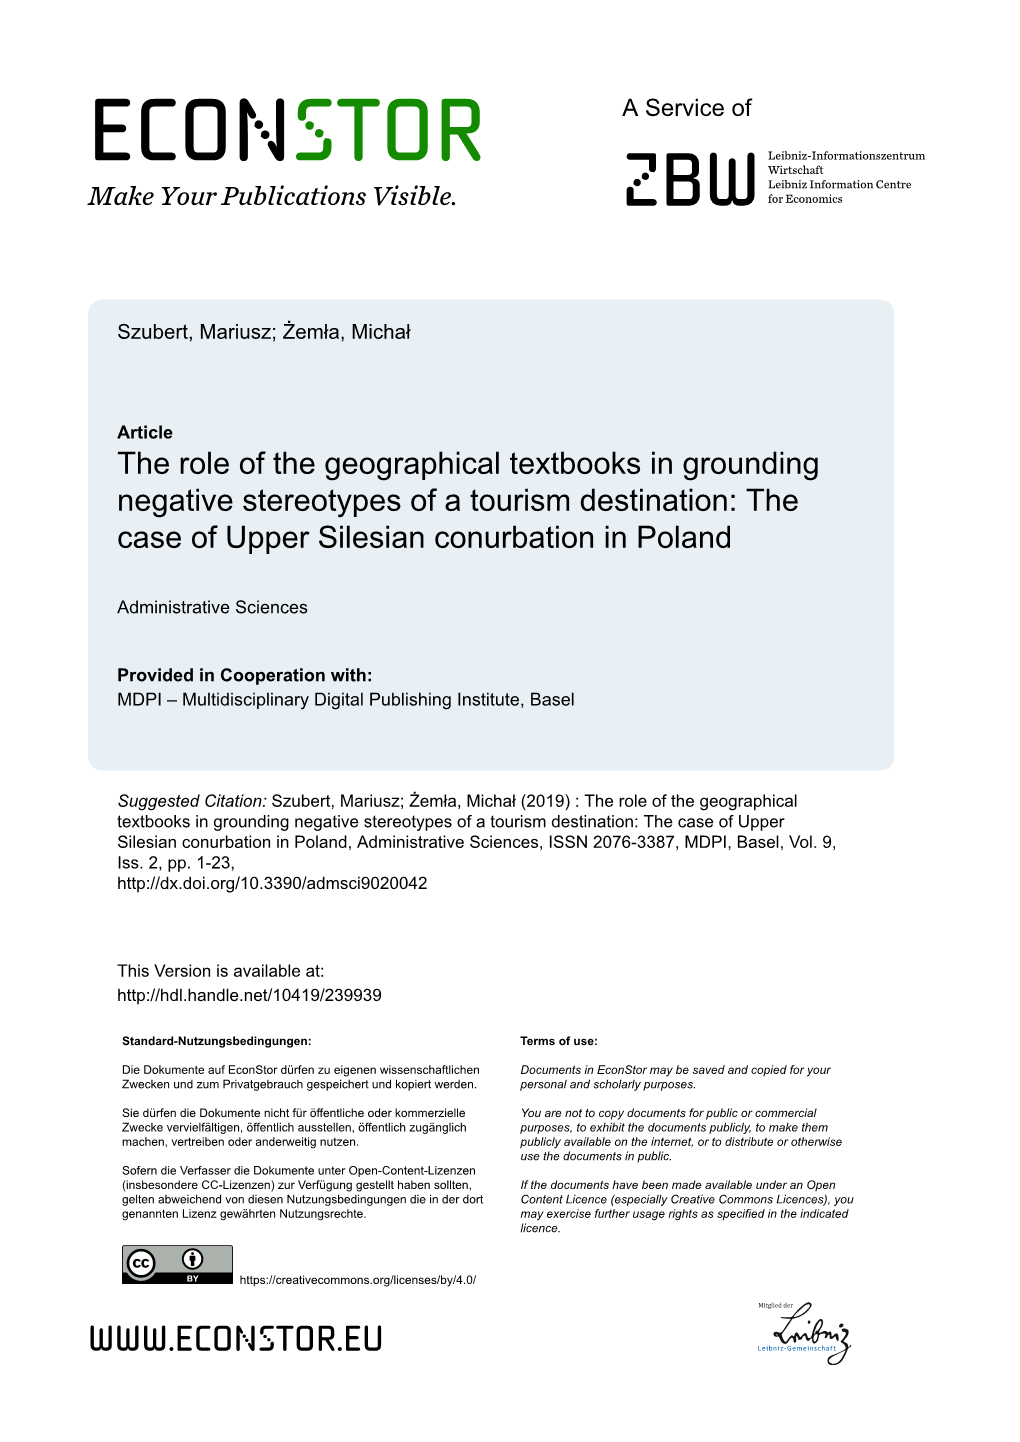 The Role of the Geographical Textbooks in Grounding Negative Stereotypes of a Tourism Destination: the Case of Upper Silesian Conurbation in Poland